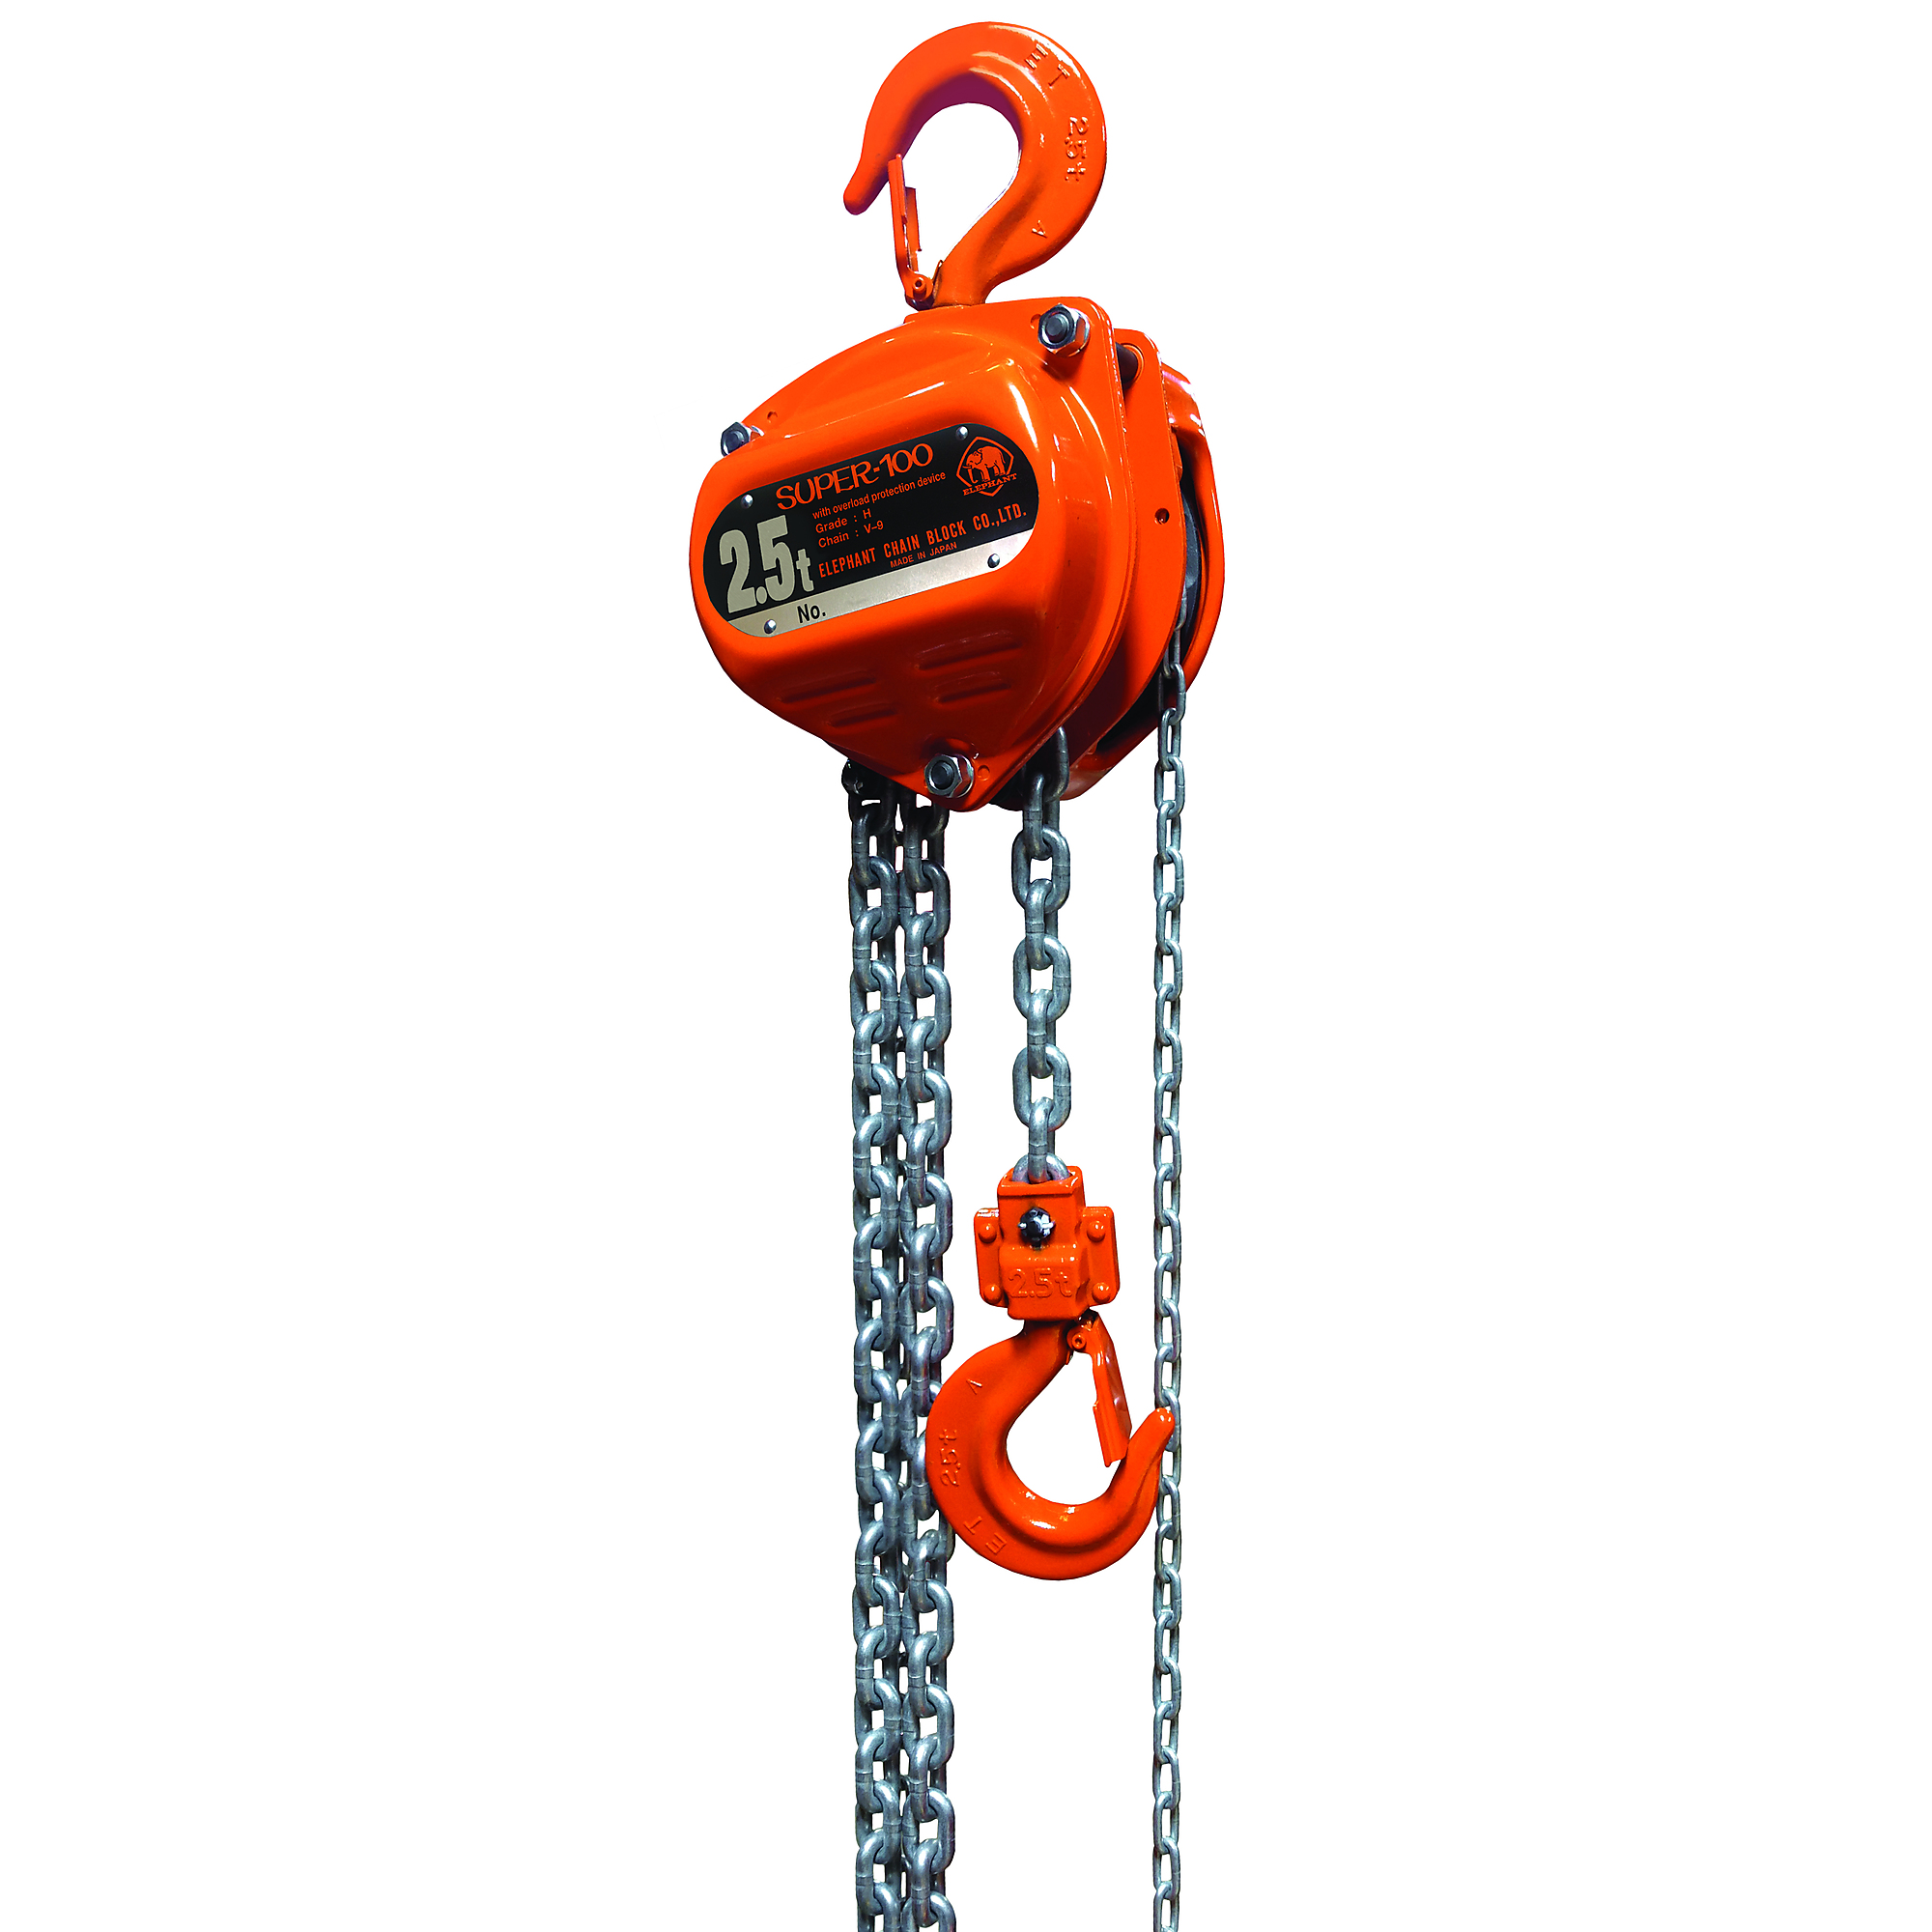 ElephantLifting, Hand Chain Hoist with Overload Protection, Power Source Manual Gear, Capacity 1100 lb, Lift Height 10 ft, Model H100